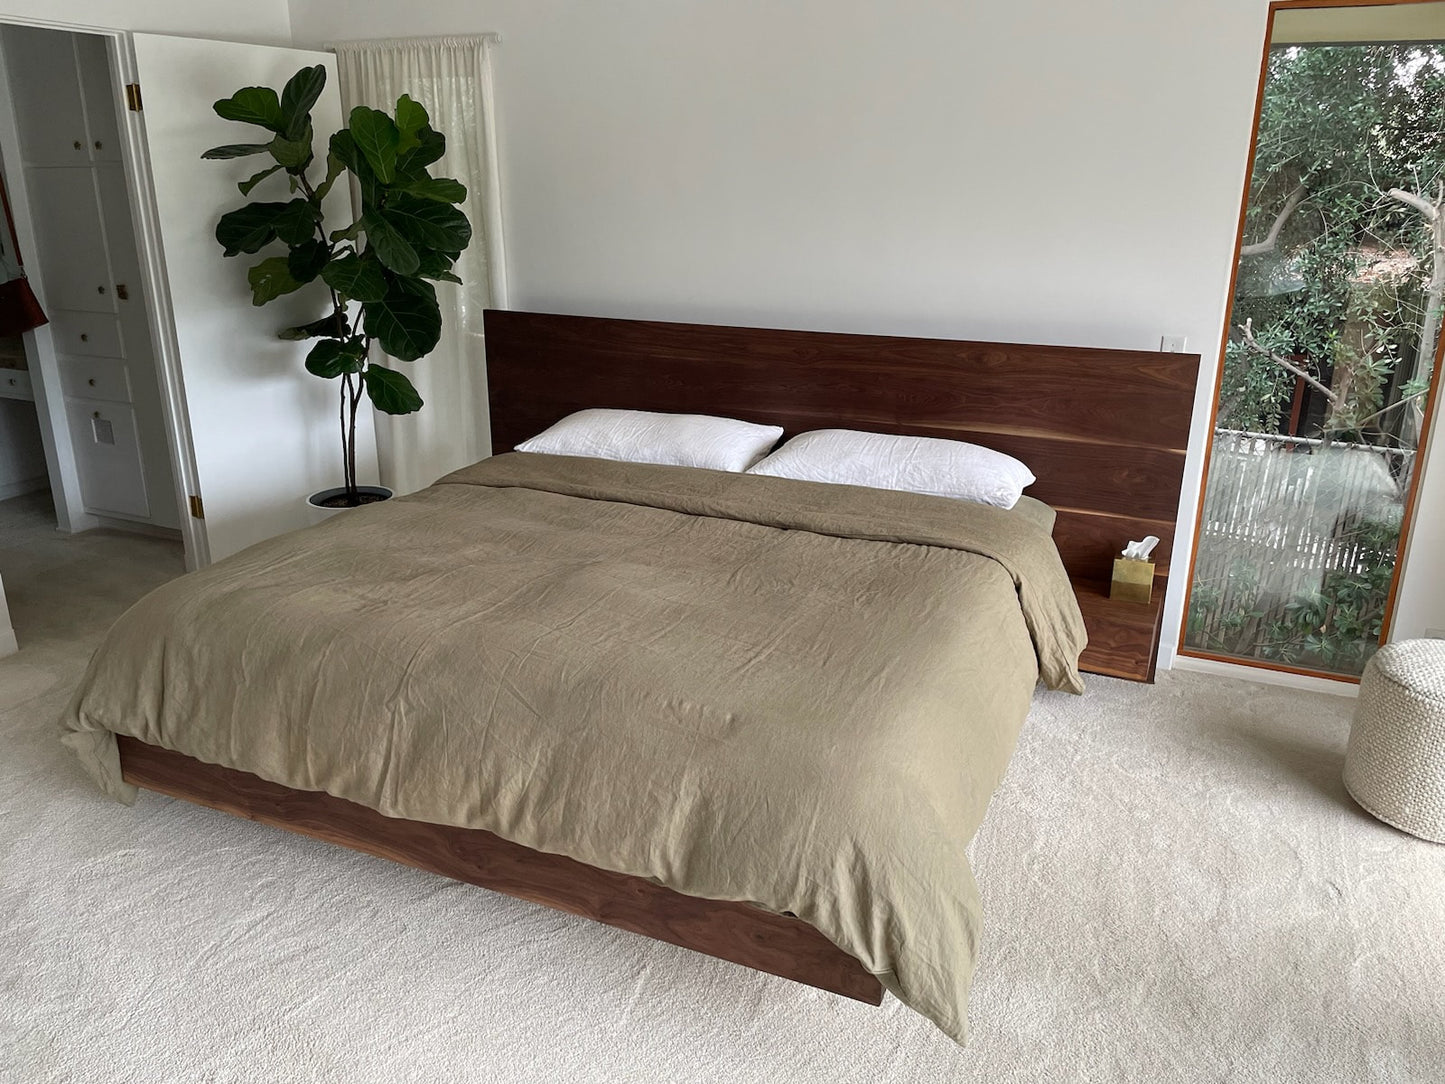 Floating Platform Bed - with Headboard